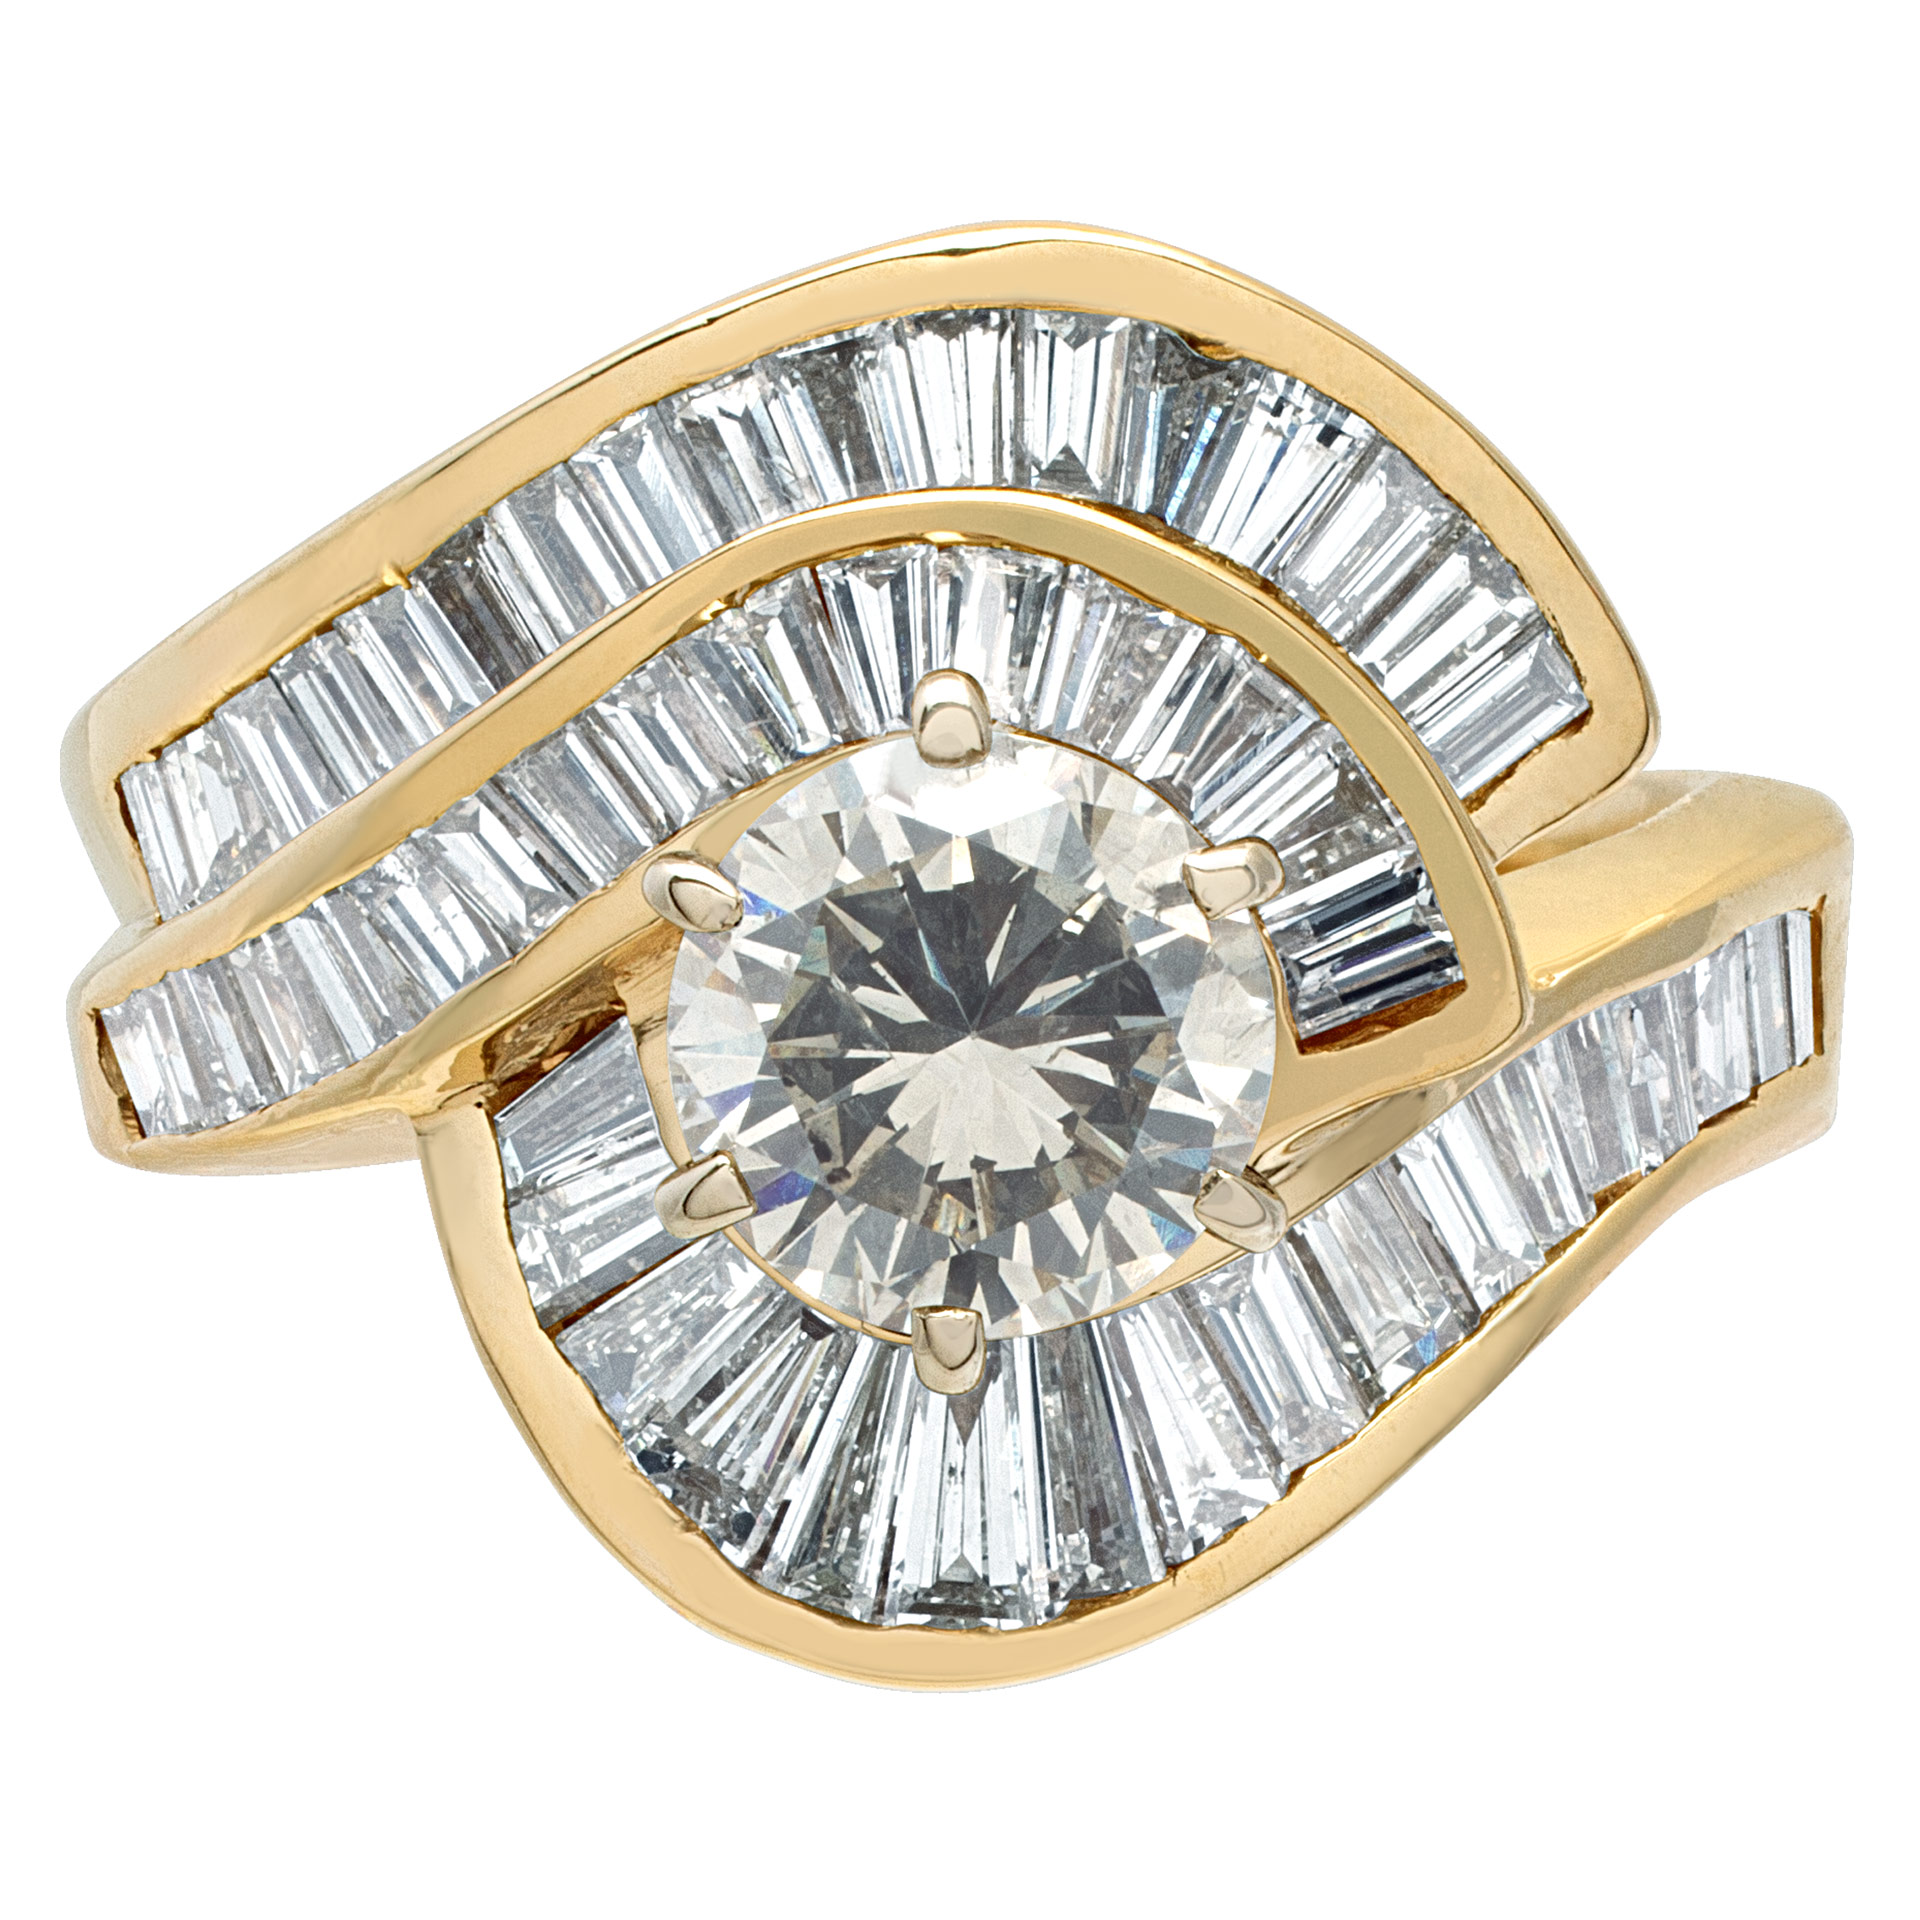 GIA certified round brilliant cut diamond 1.02 carat (S to T range, Light Brown, I1 clarity) ring with over 1.50 carat in baguette diamonds